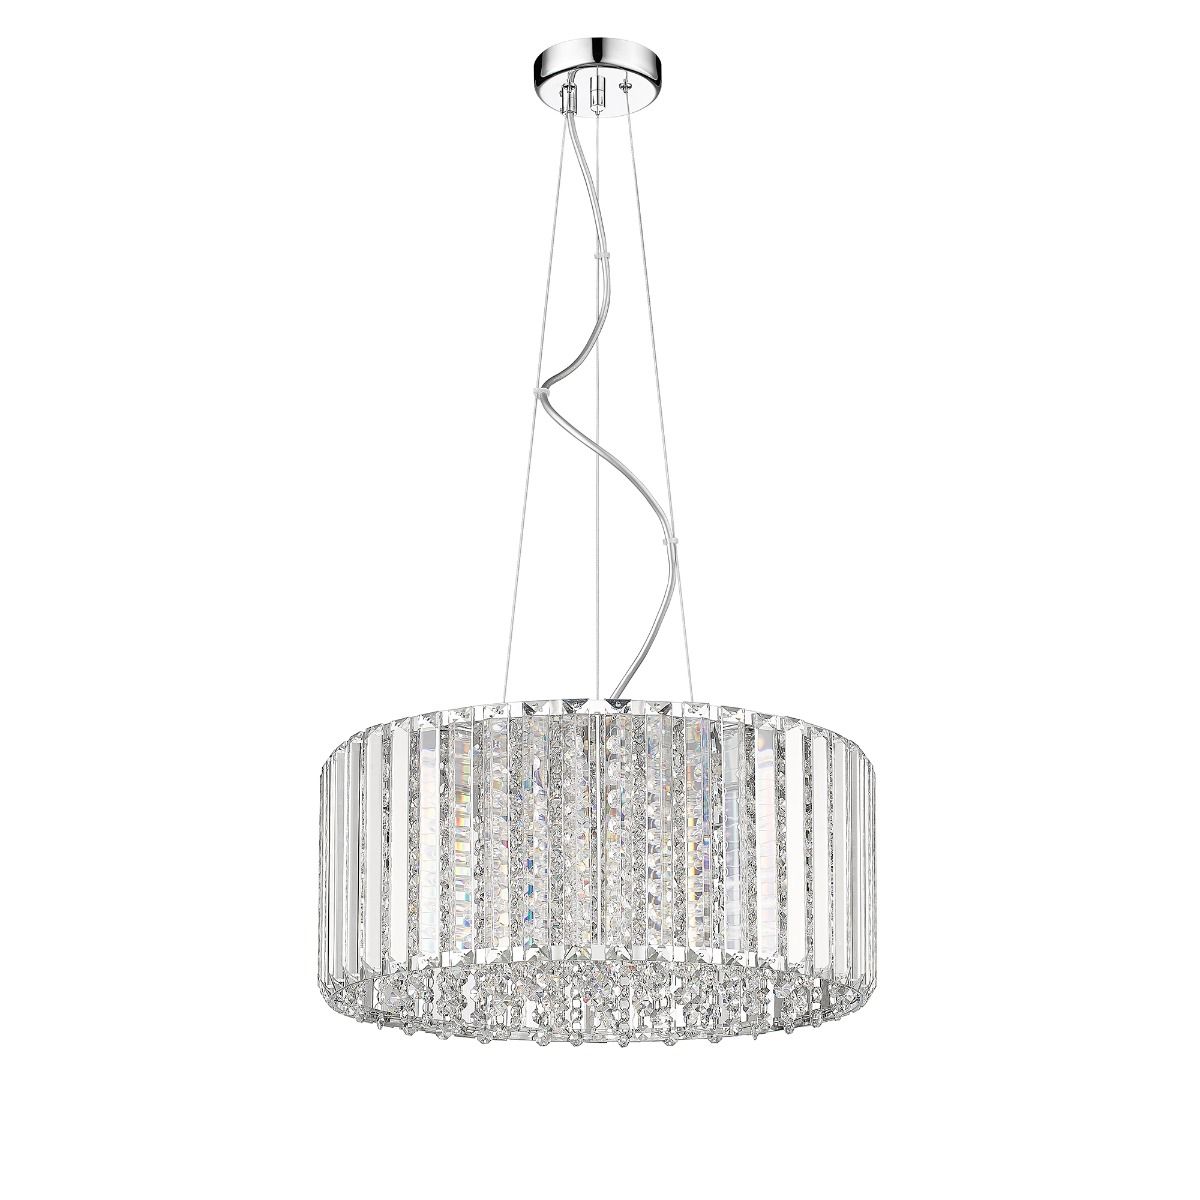 ove-chandelier-rond-patience-del-intégrée-led-integrated-round-3